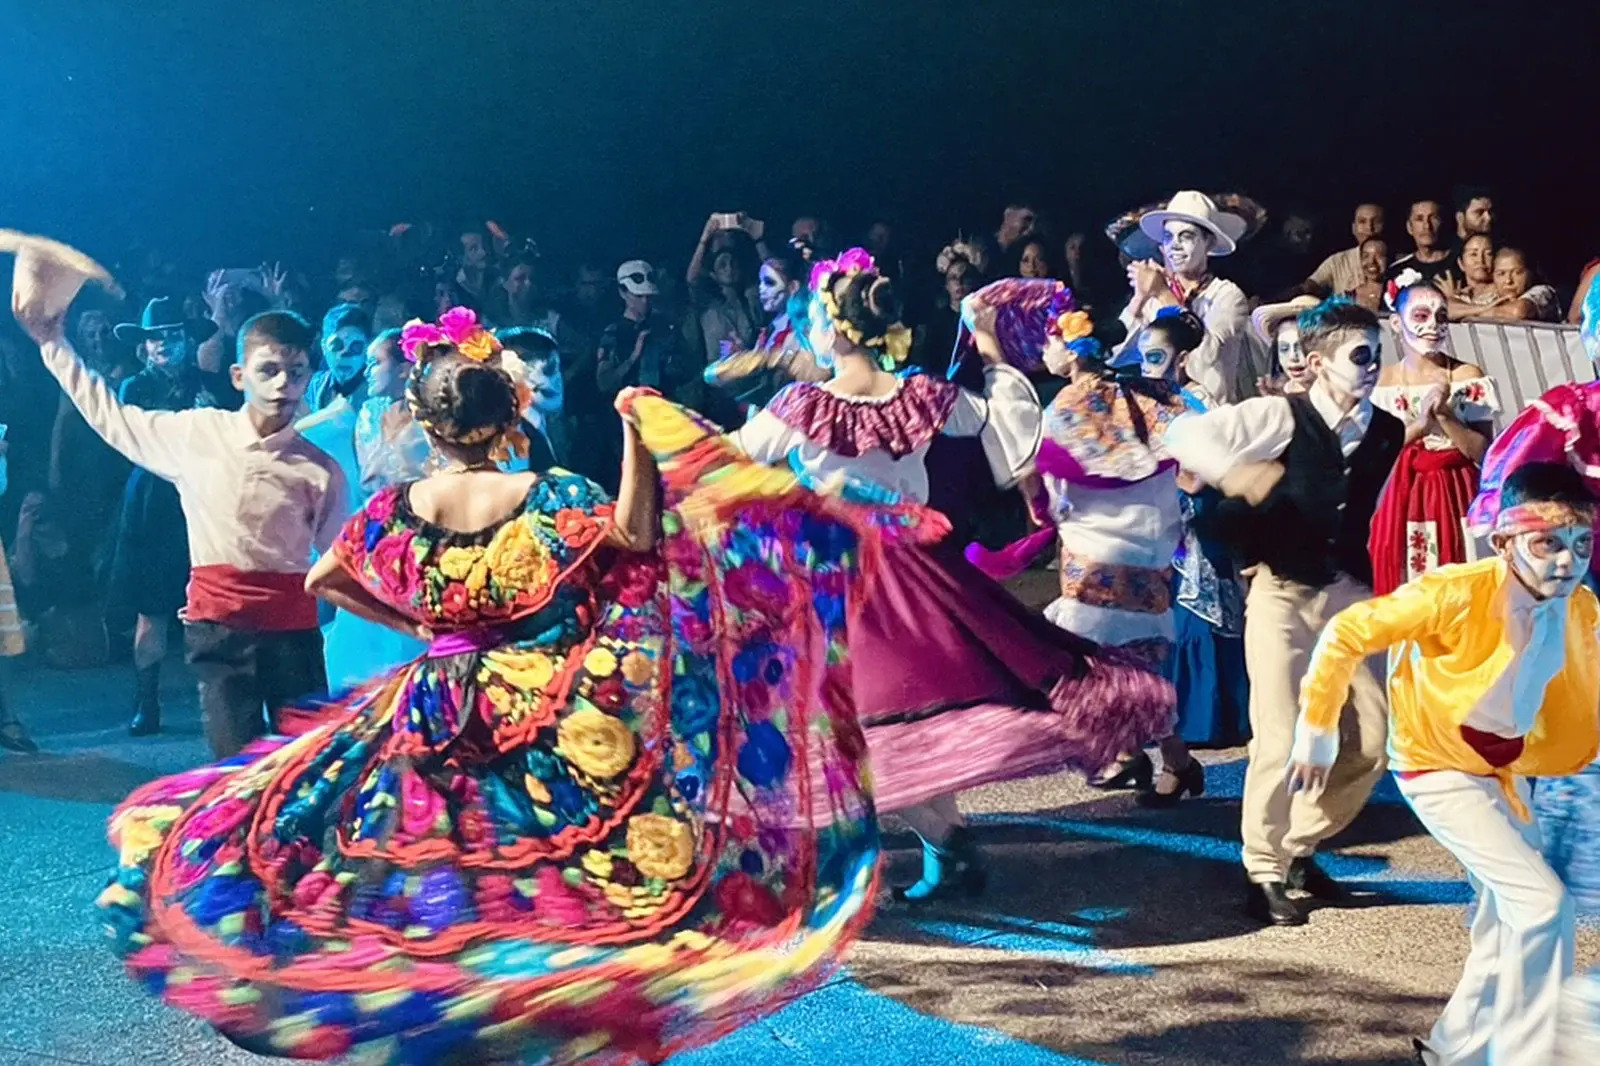 Children dancing at night in traditional costumes for the Day of The Dead